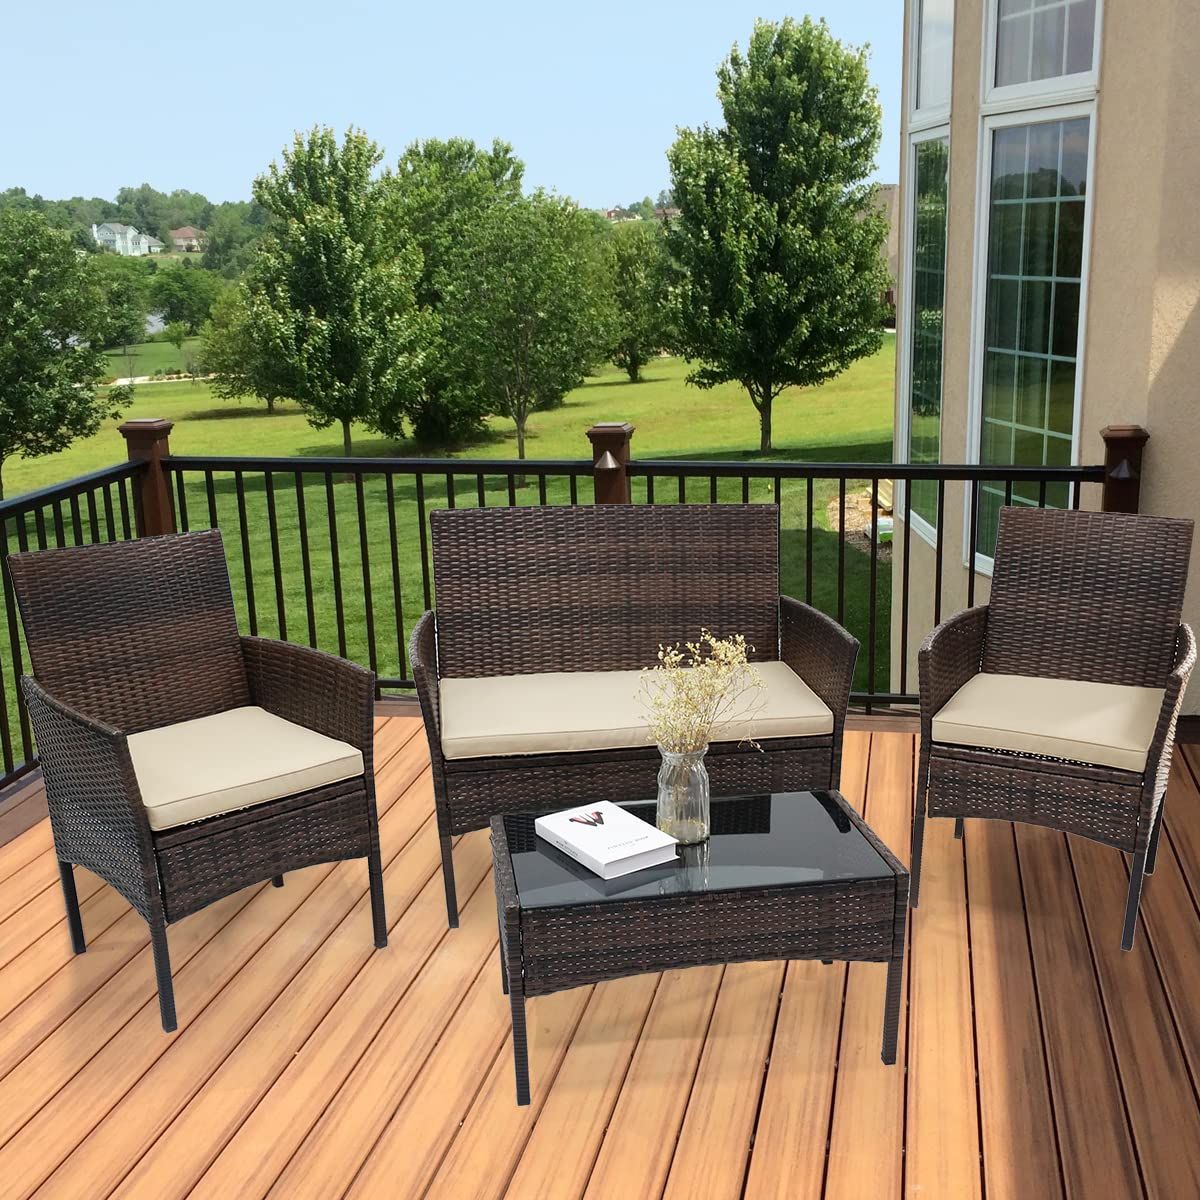 Balcony Furniture Set With Beige Cushions Throughout Best And Newest Amazon: Patio Furniture Set, 4 Pieces Porch Backyard Garden Outdoor  Furniture Rattan Chairs And Table Wicker Conversation Set With Beige  Cushions : Patio, Lawn & Garden (Photo 4 of 15)